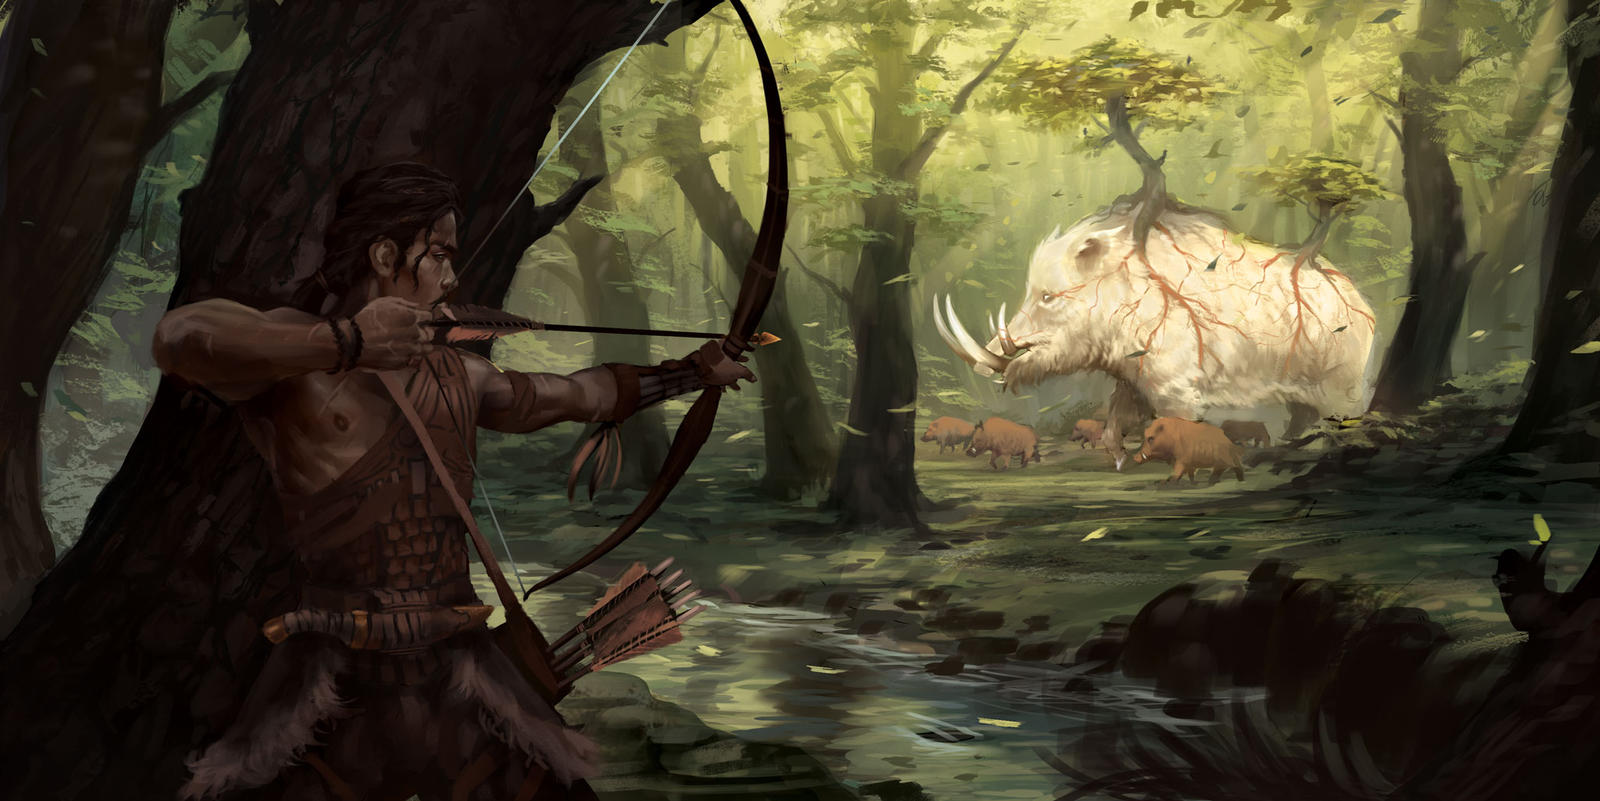 boar_forest_god_thingie_by_castaguer93-d8w49na.jpg